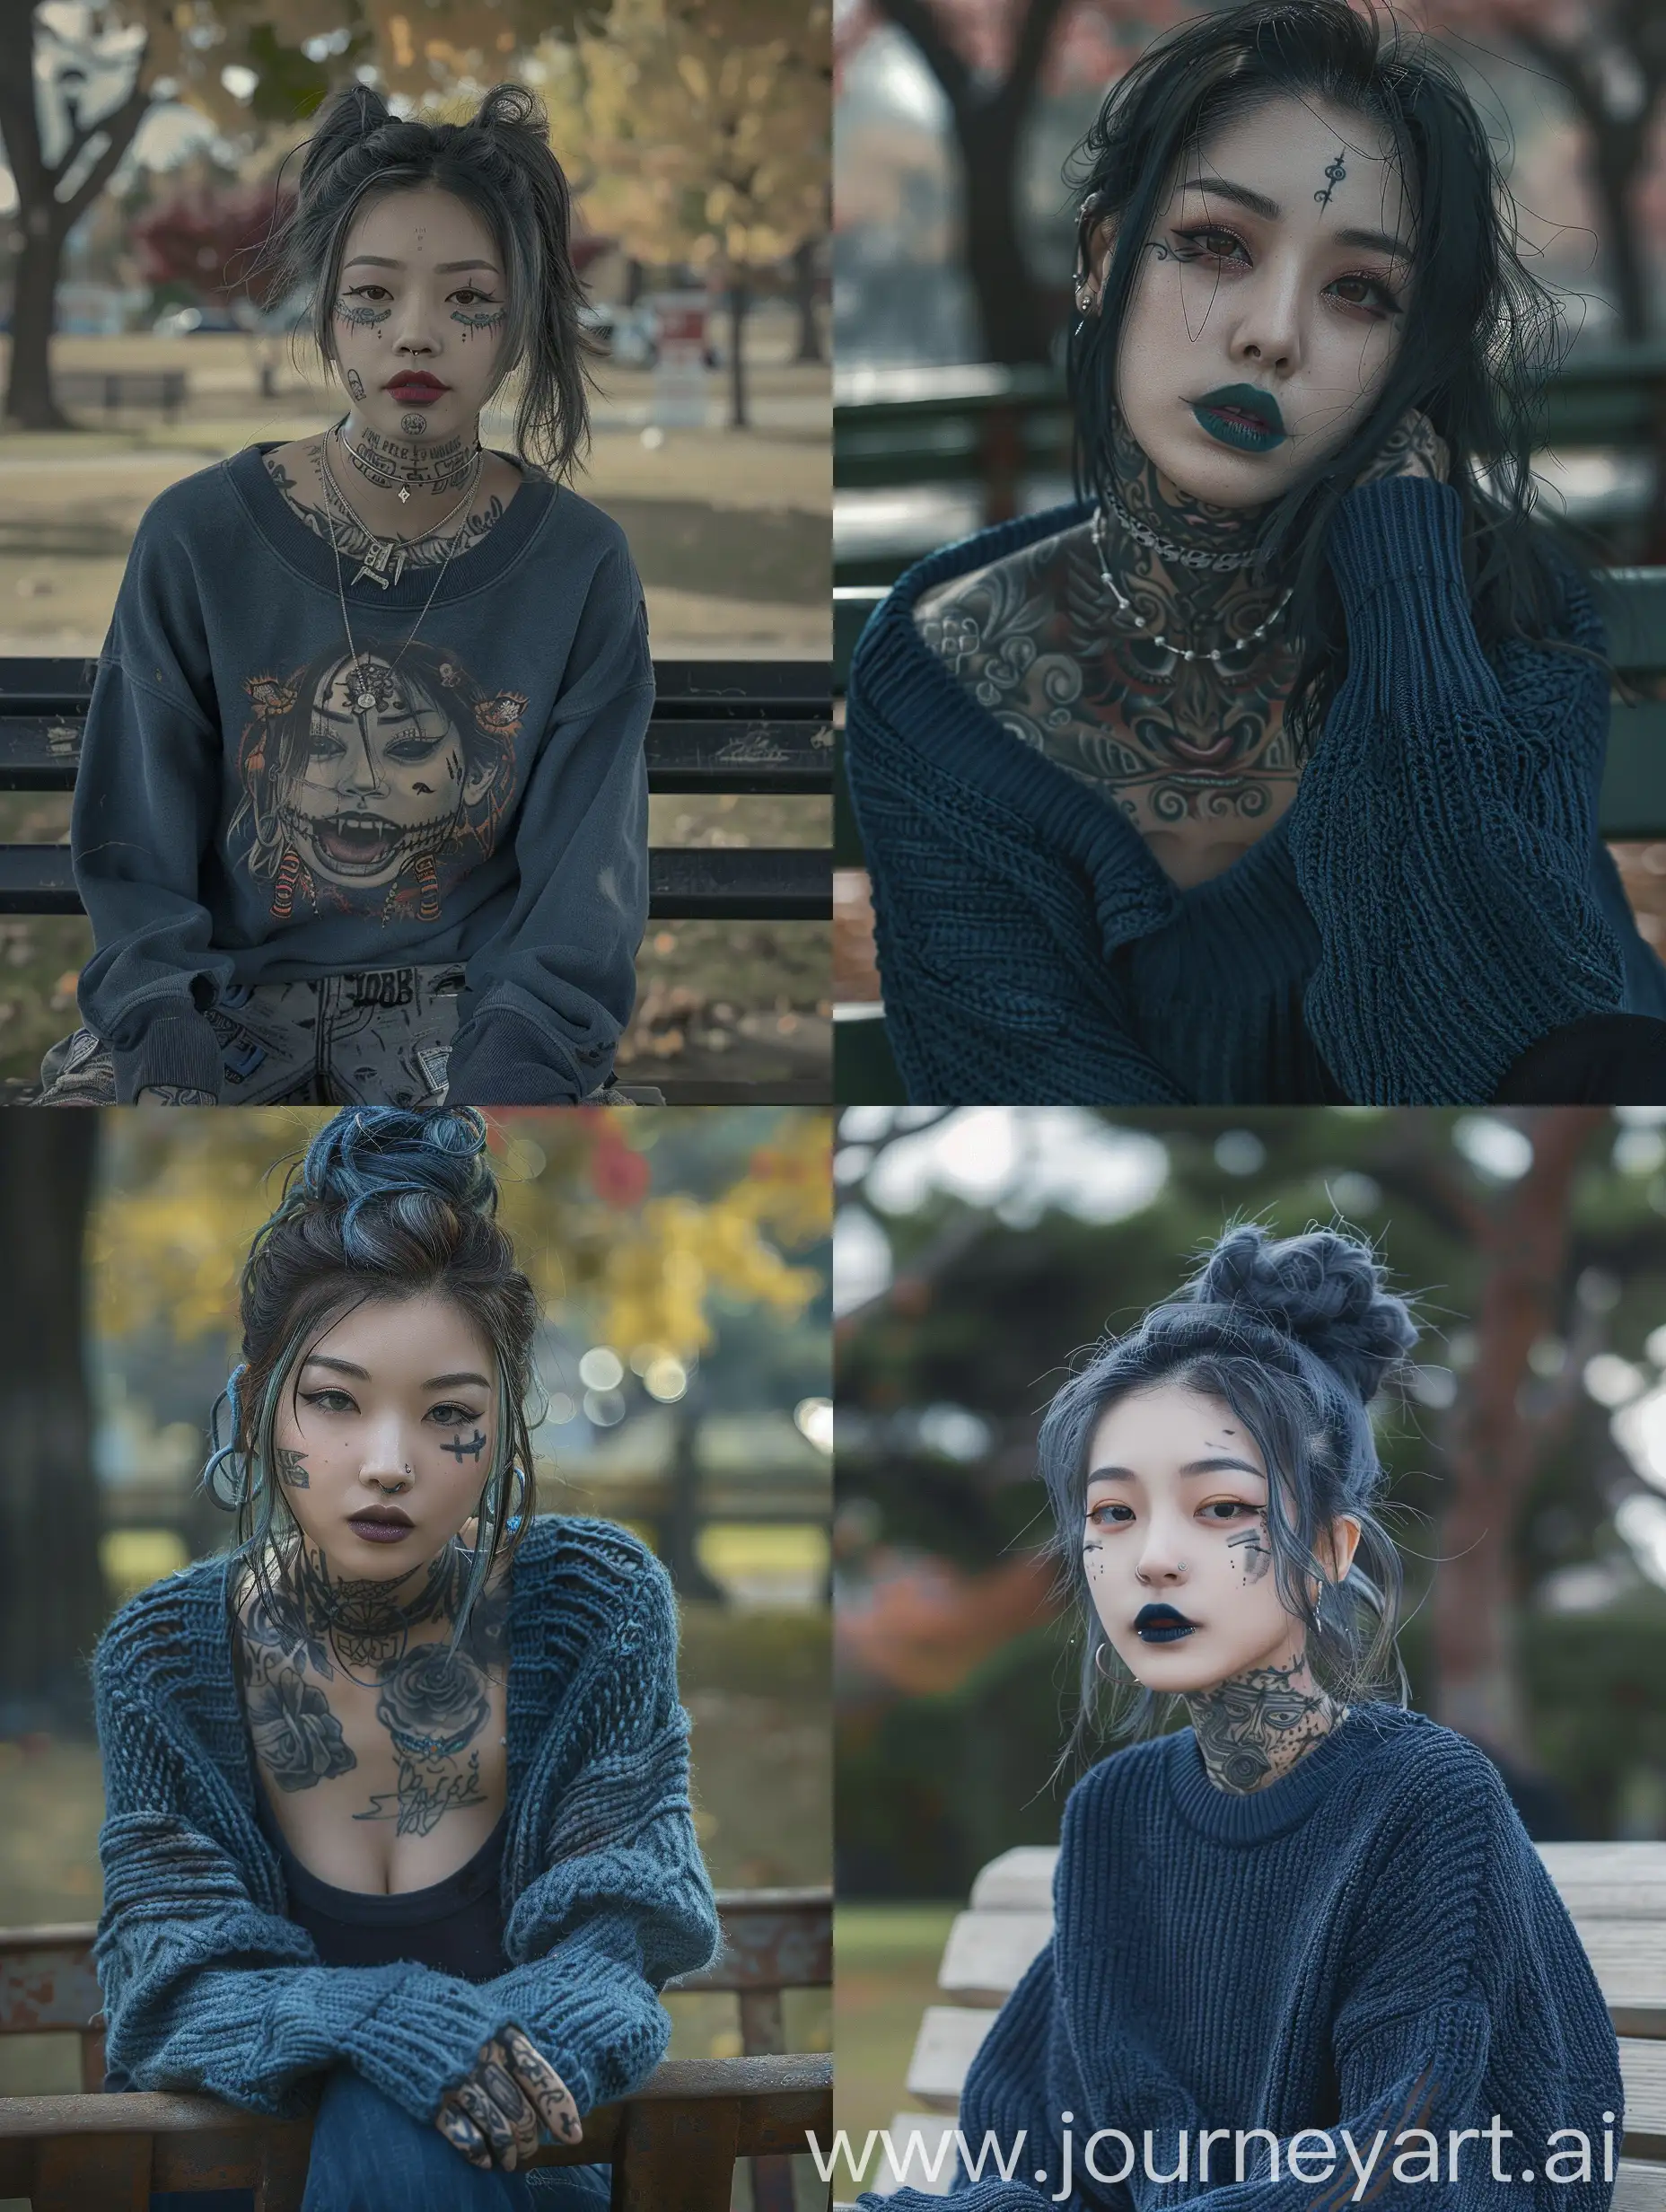 Punk-Korean-Woman-with-Homemade-Tattoos-and-Disheveled-Hair-Sitting-on-Park-Bench